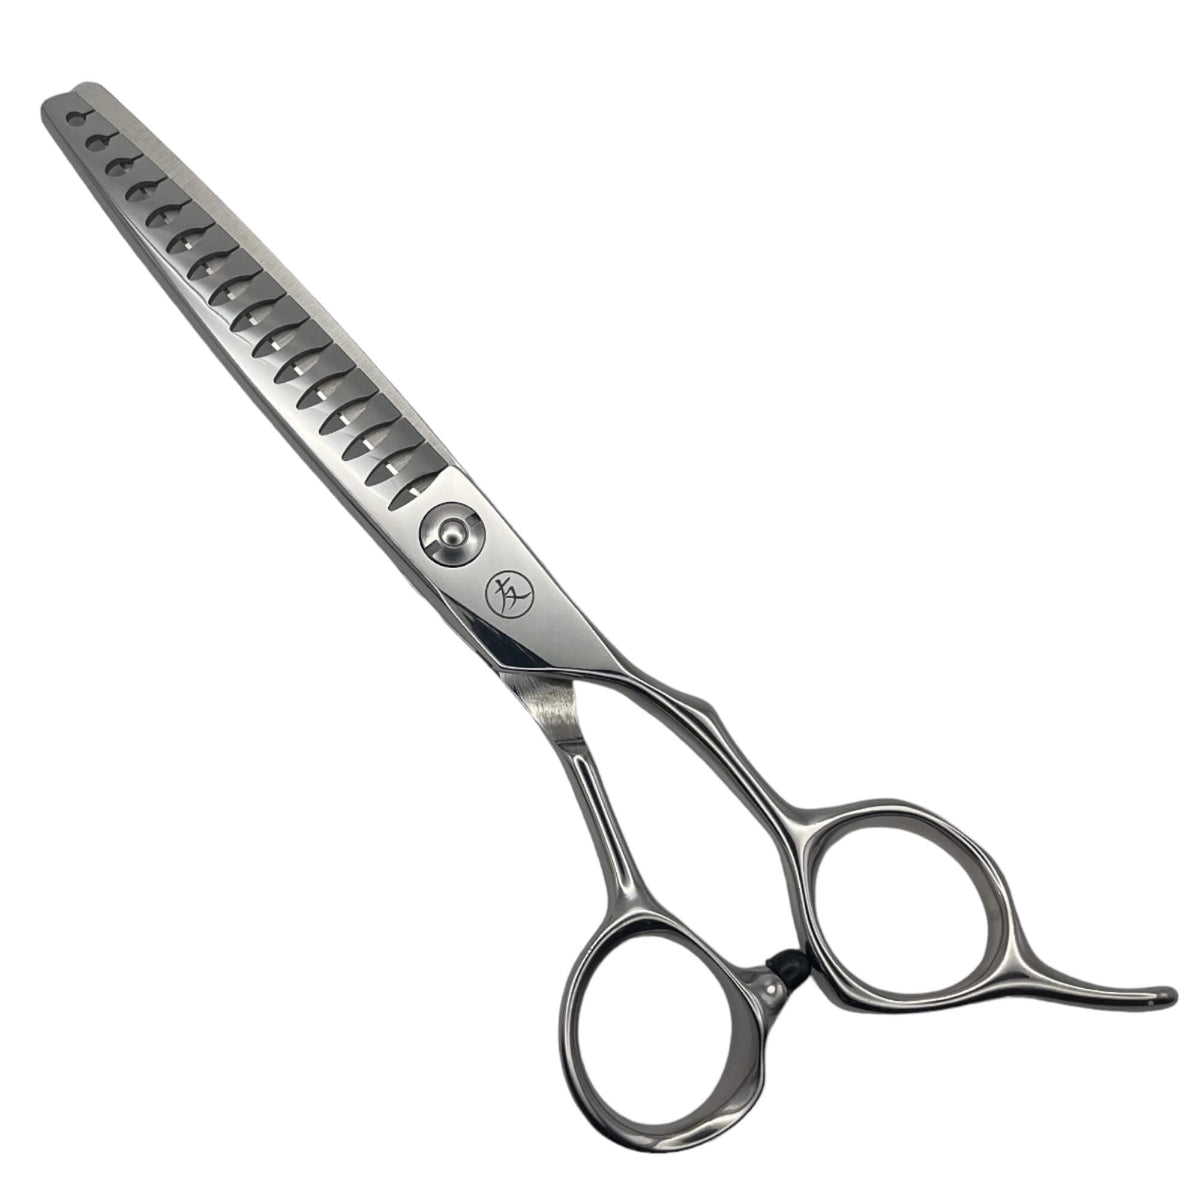 SHATTER texturising scissors and texturising shears side 